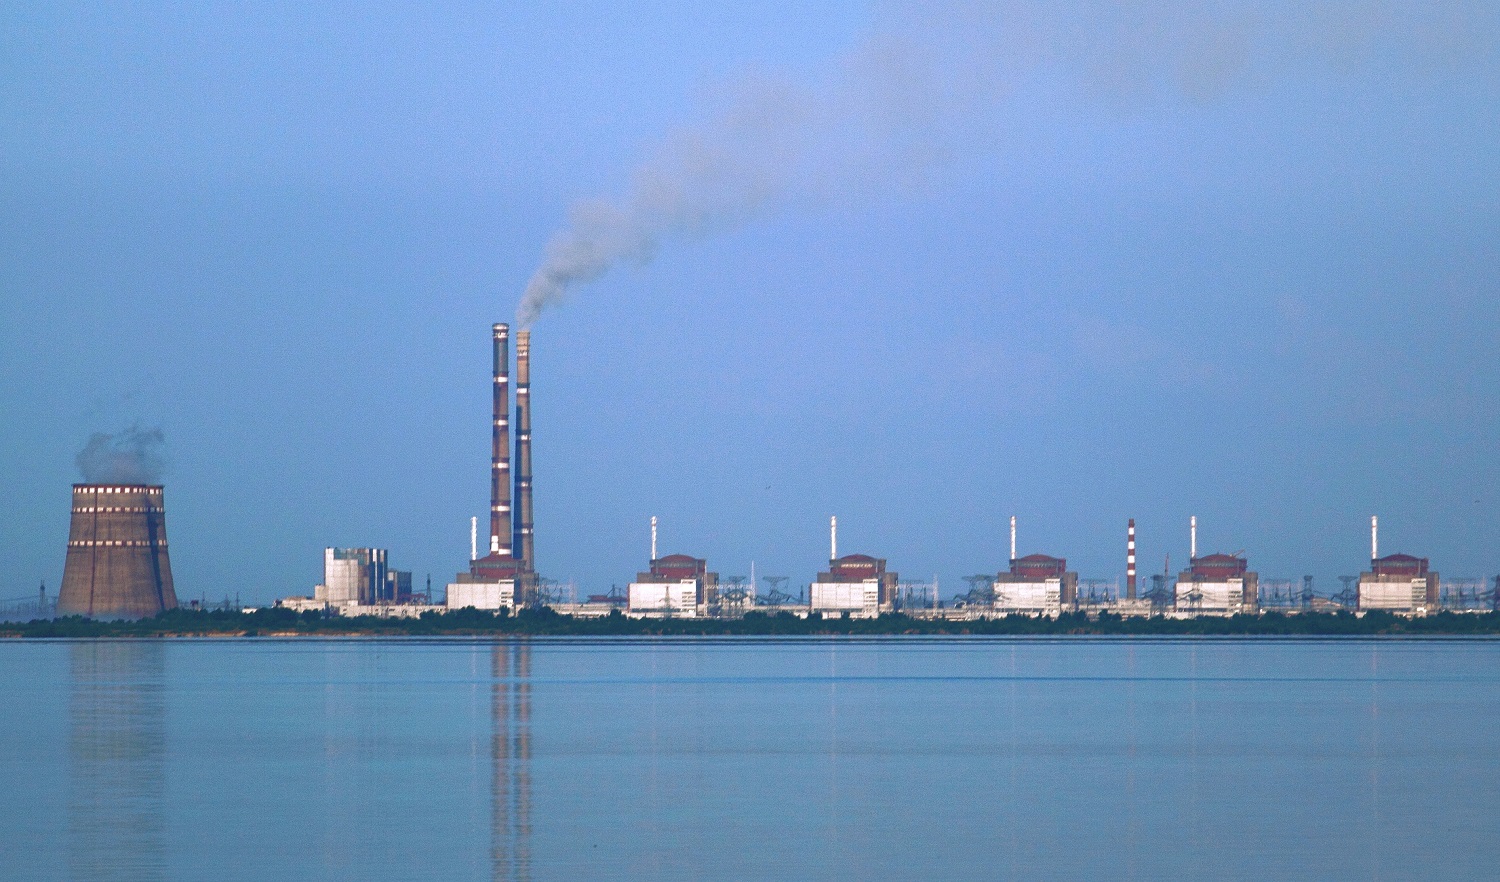 Russians fired artillery at Zaporizhzhya NPP, Europe's largest nuclear power plant with six units of 6,000 MW